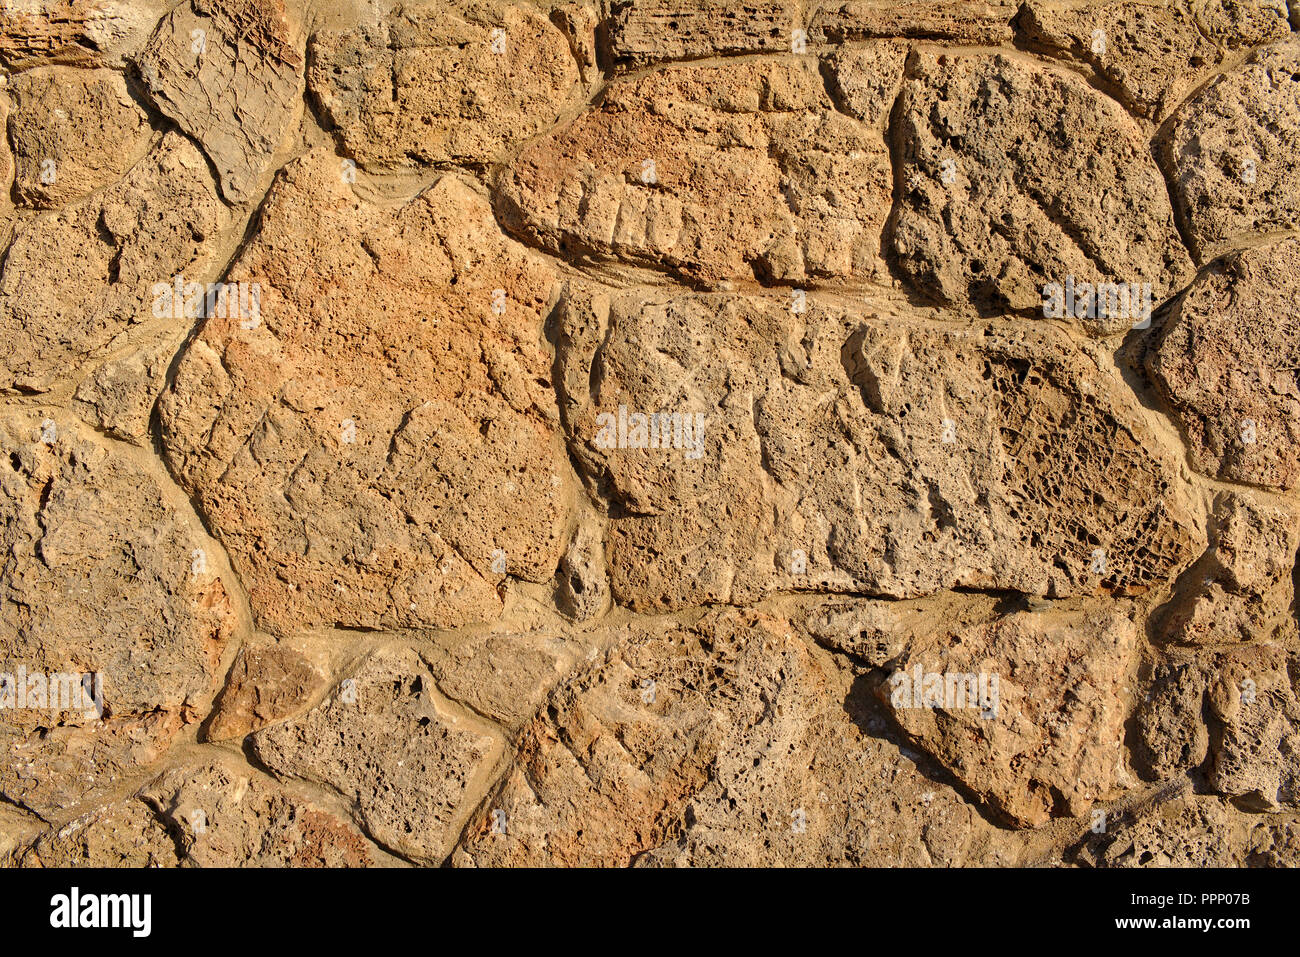 Sandstone wall made of irregular porous pieces of stone lit by the evening sun Stock Photo